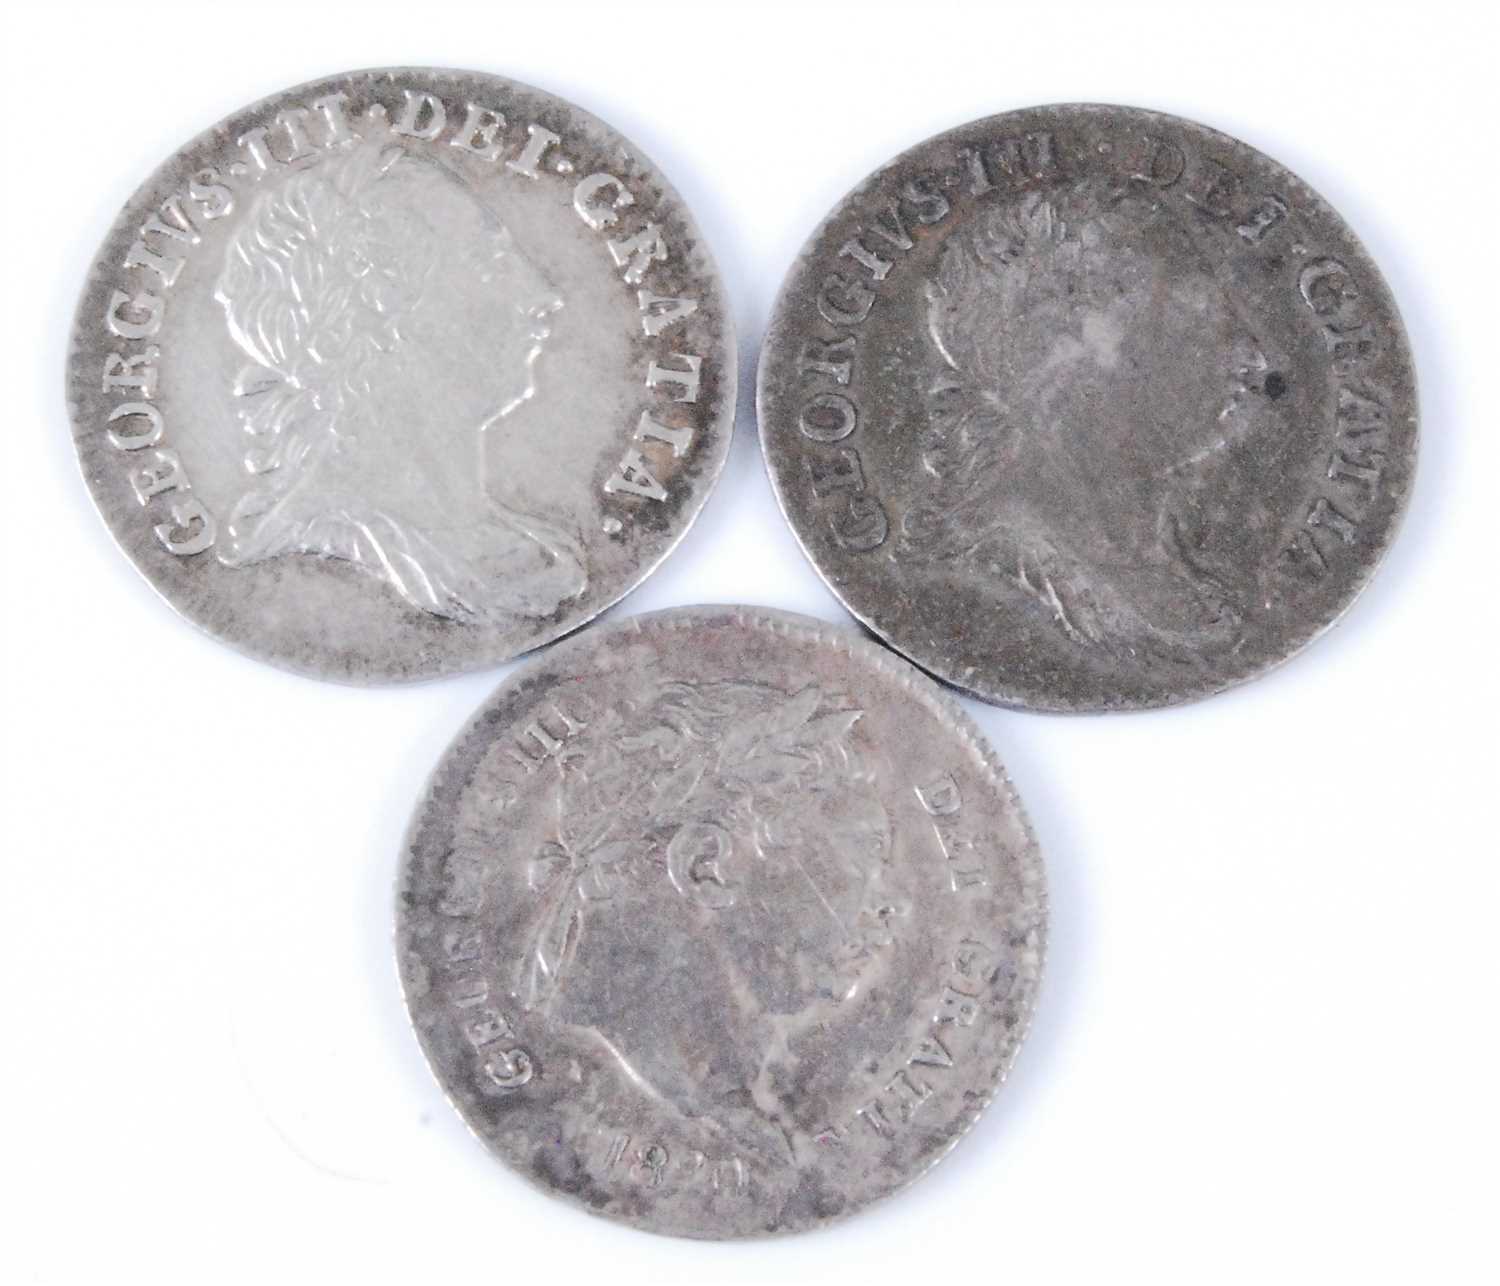 Lot 2029 - Great Britain, Three Maundey Money 3d coins